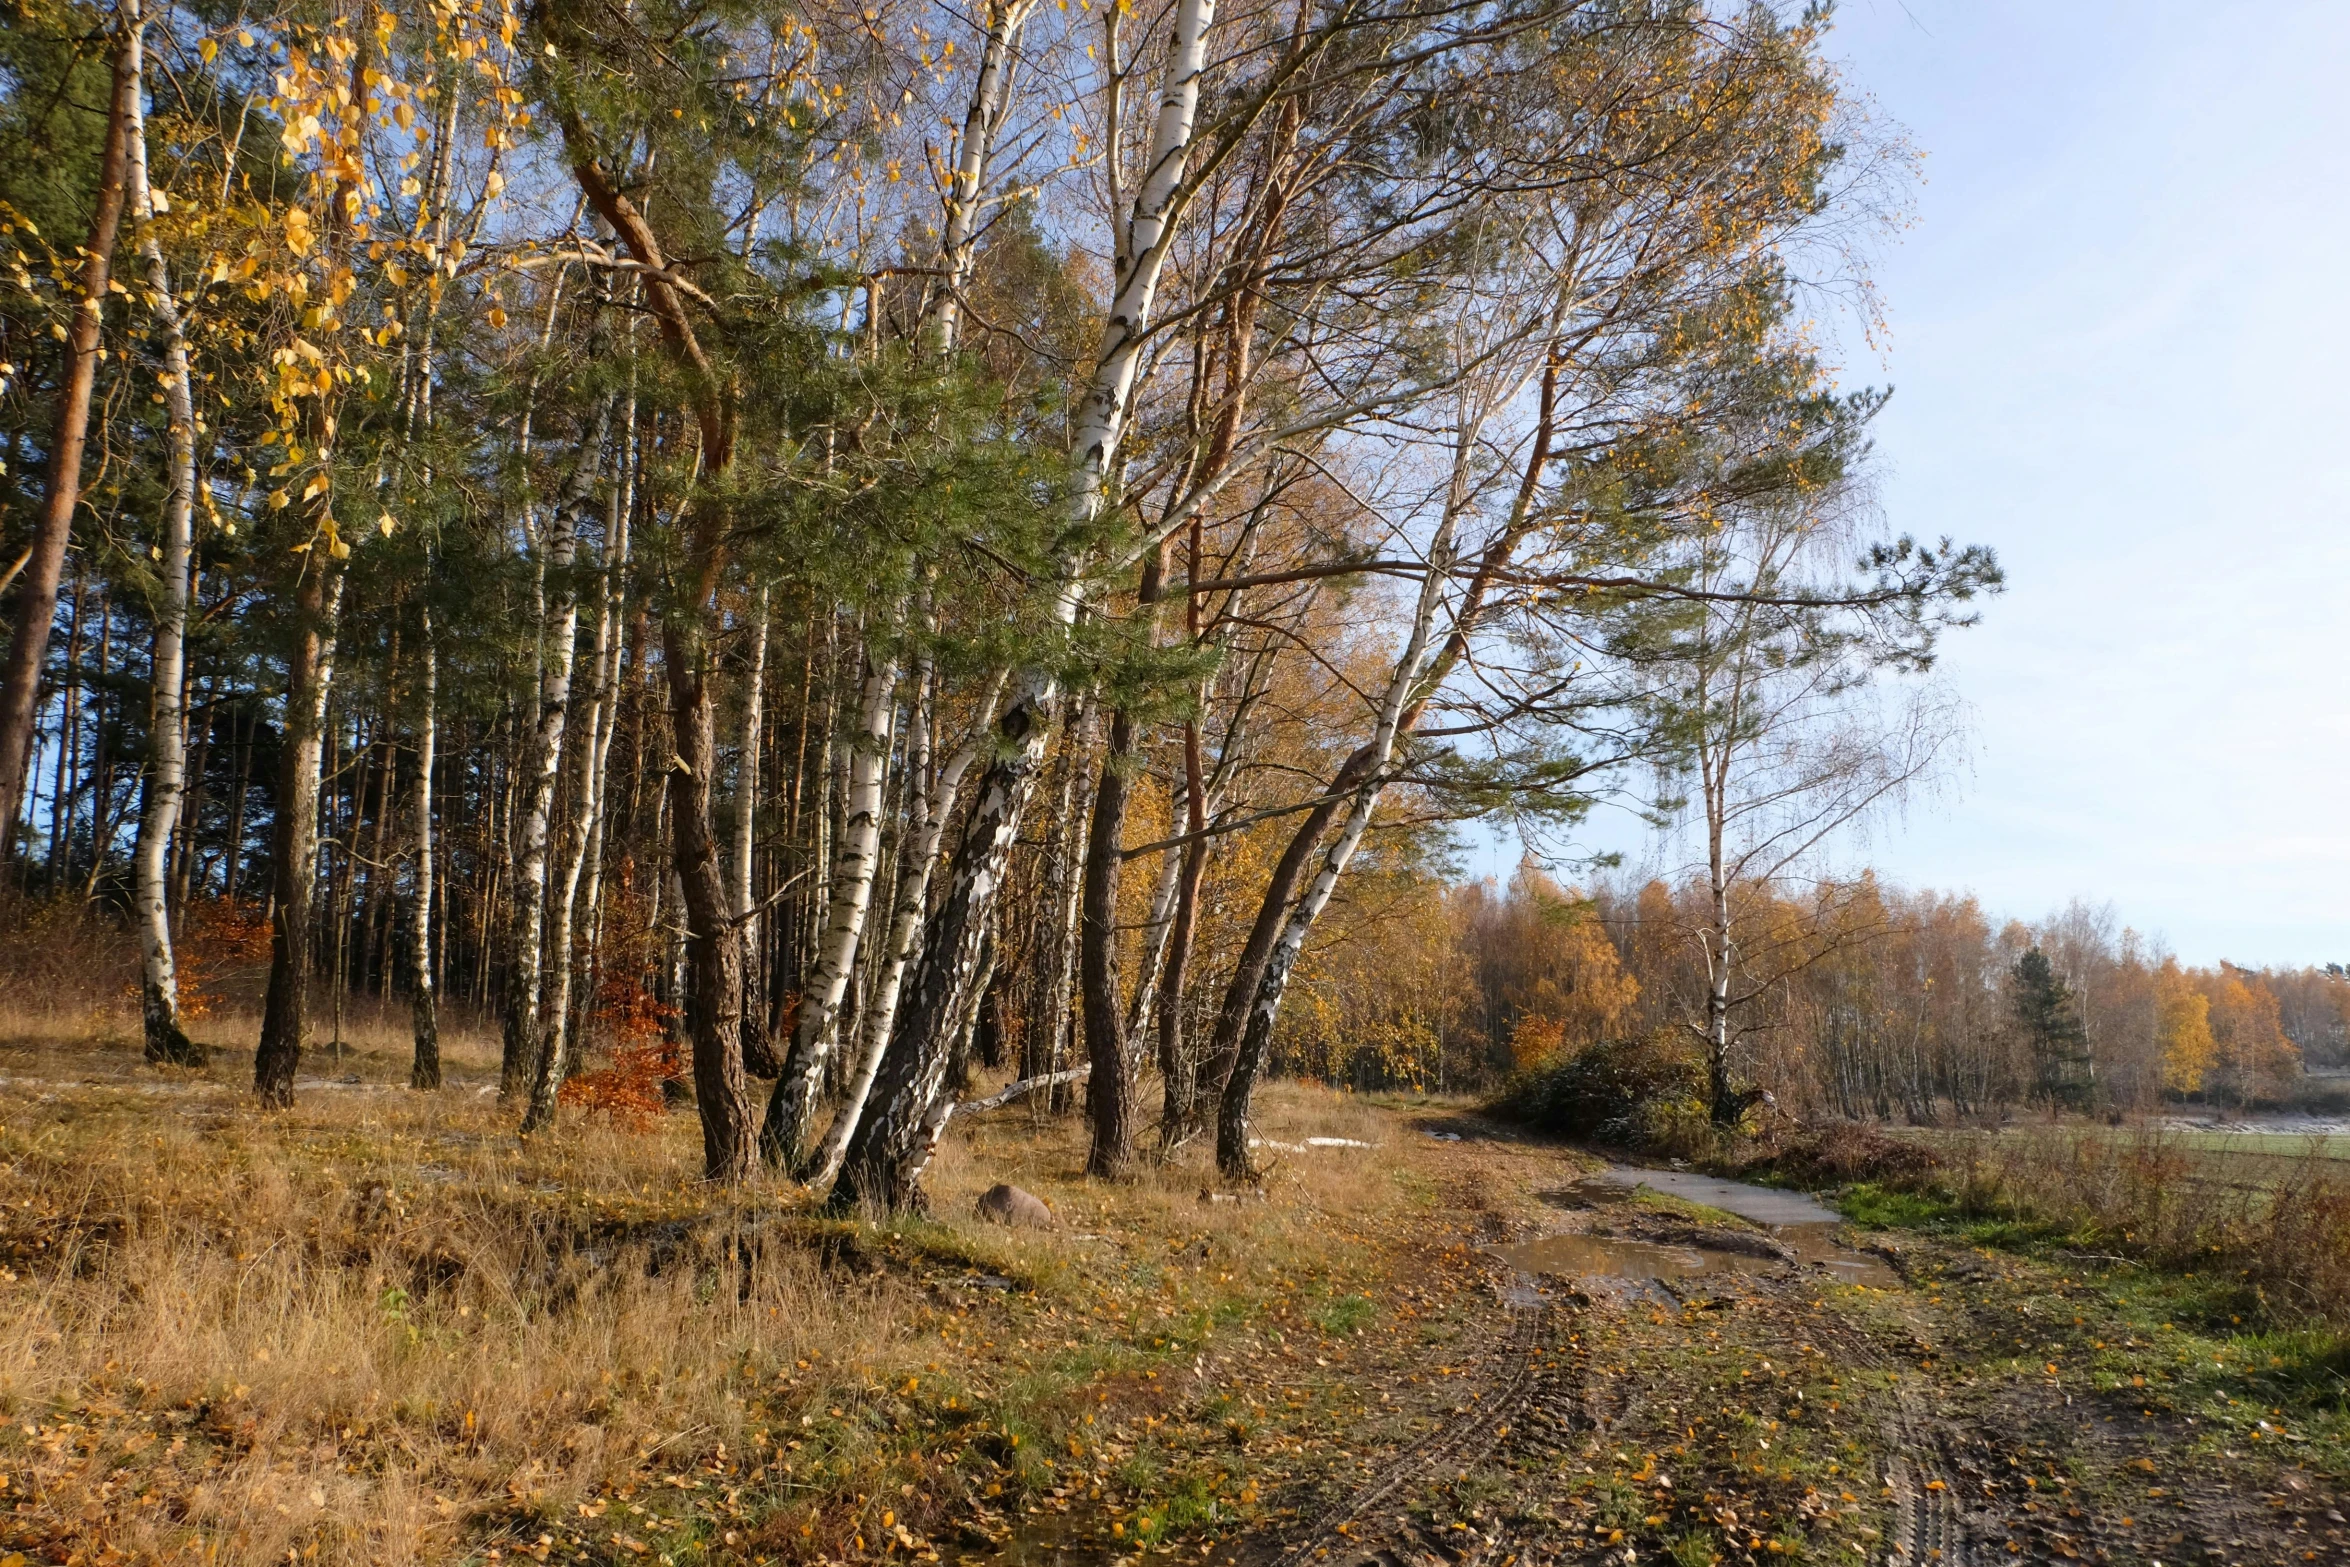 the path in the forest has many yellow trees near by